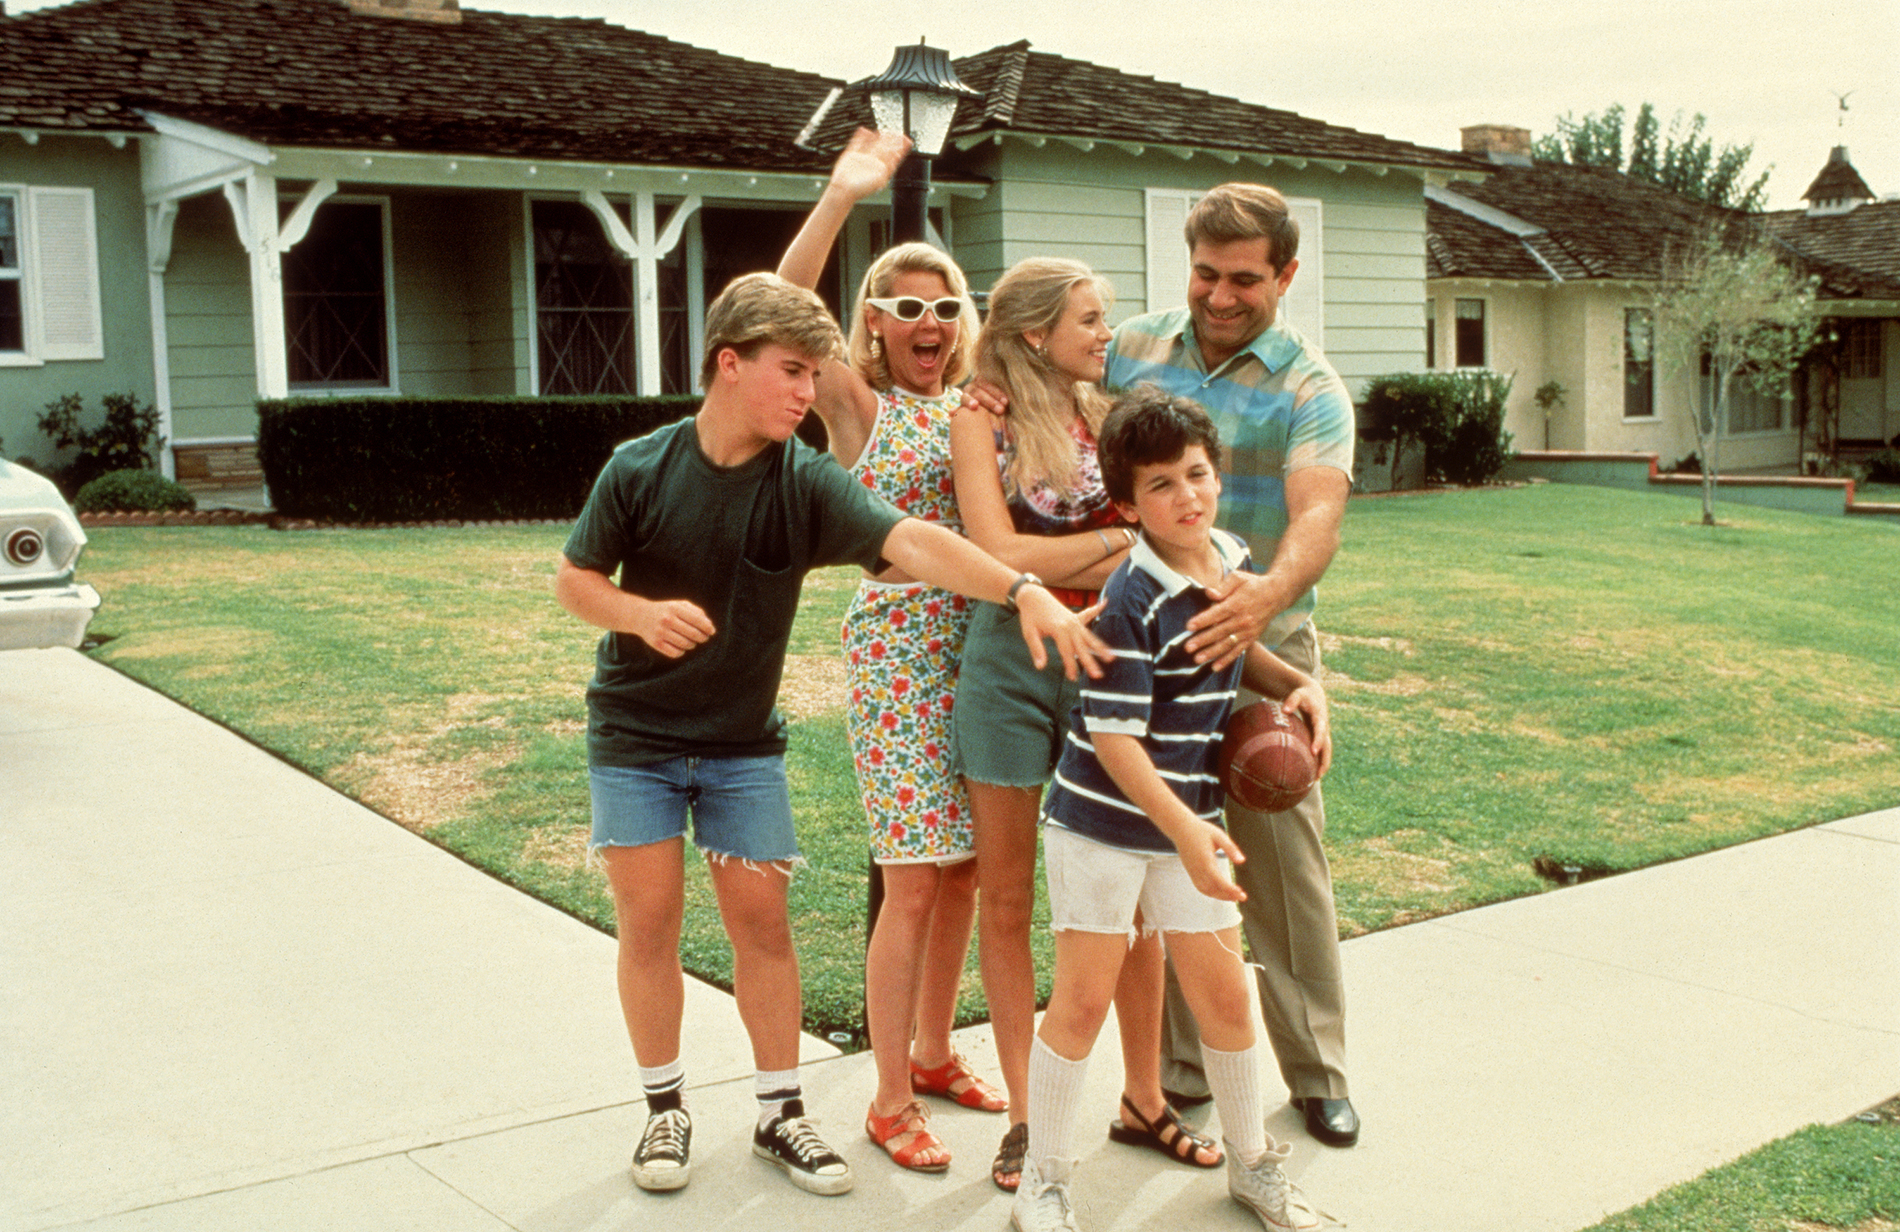 The Wonder Years is set in "Anytown", USA. The creators wanted to set it in their hometowns, however, the studio wanted it to be relatable to anyone. The exterior of Kevin Arnold's house was shot in Burbank, CA and the rest of the series was filmed around Culver City, CA.
